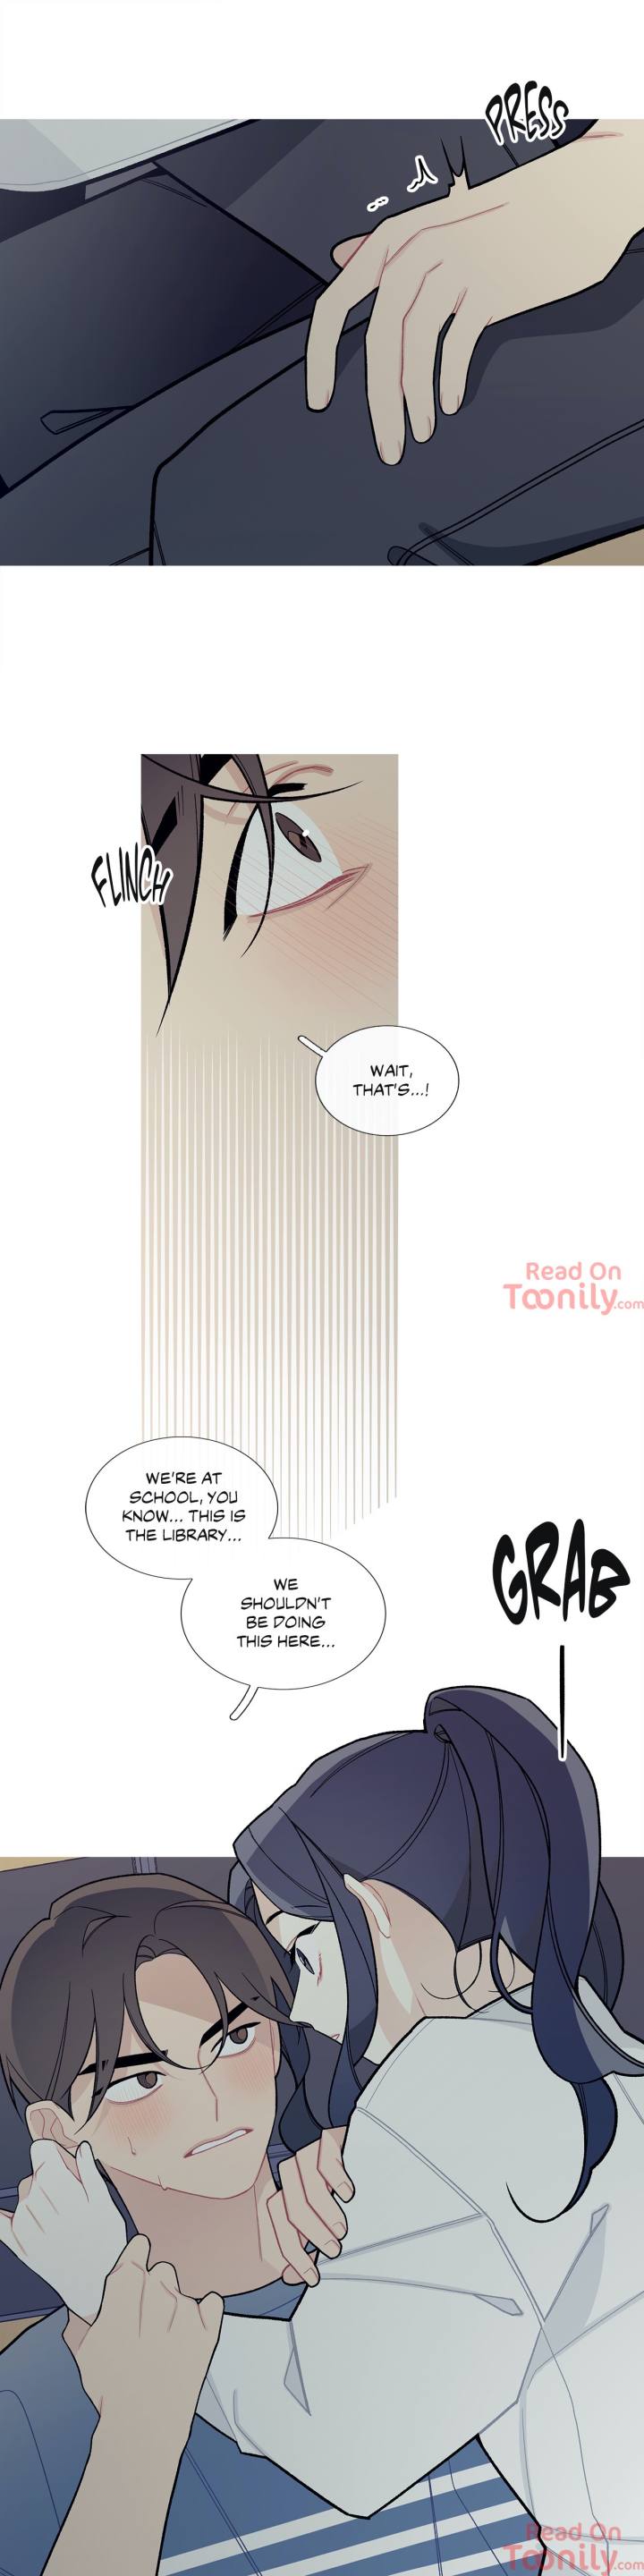 What’s Going On? - Chapter 52 Page 4